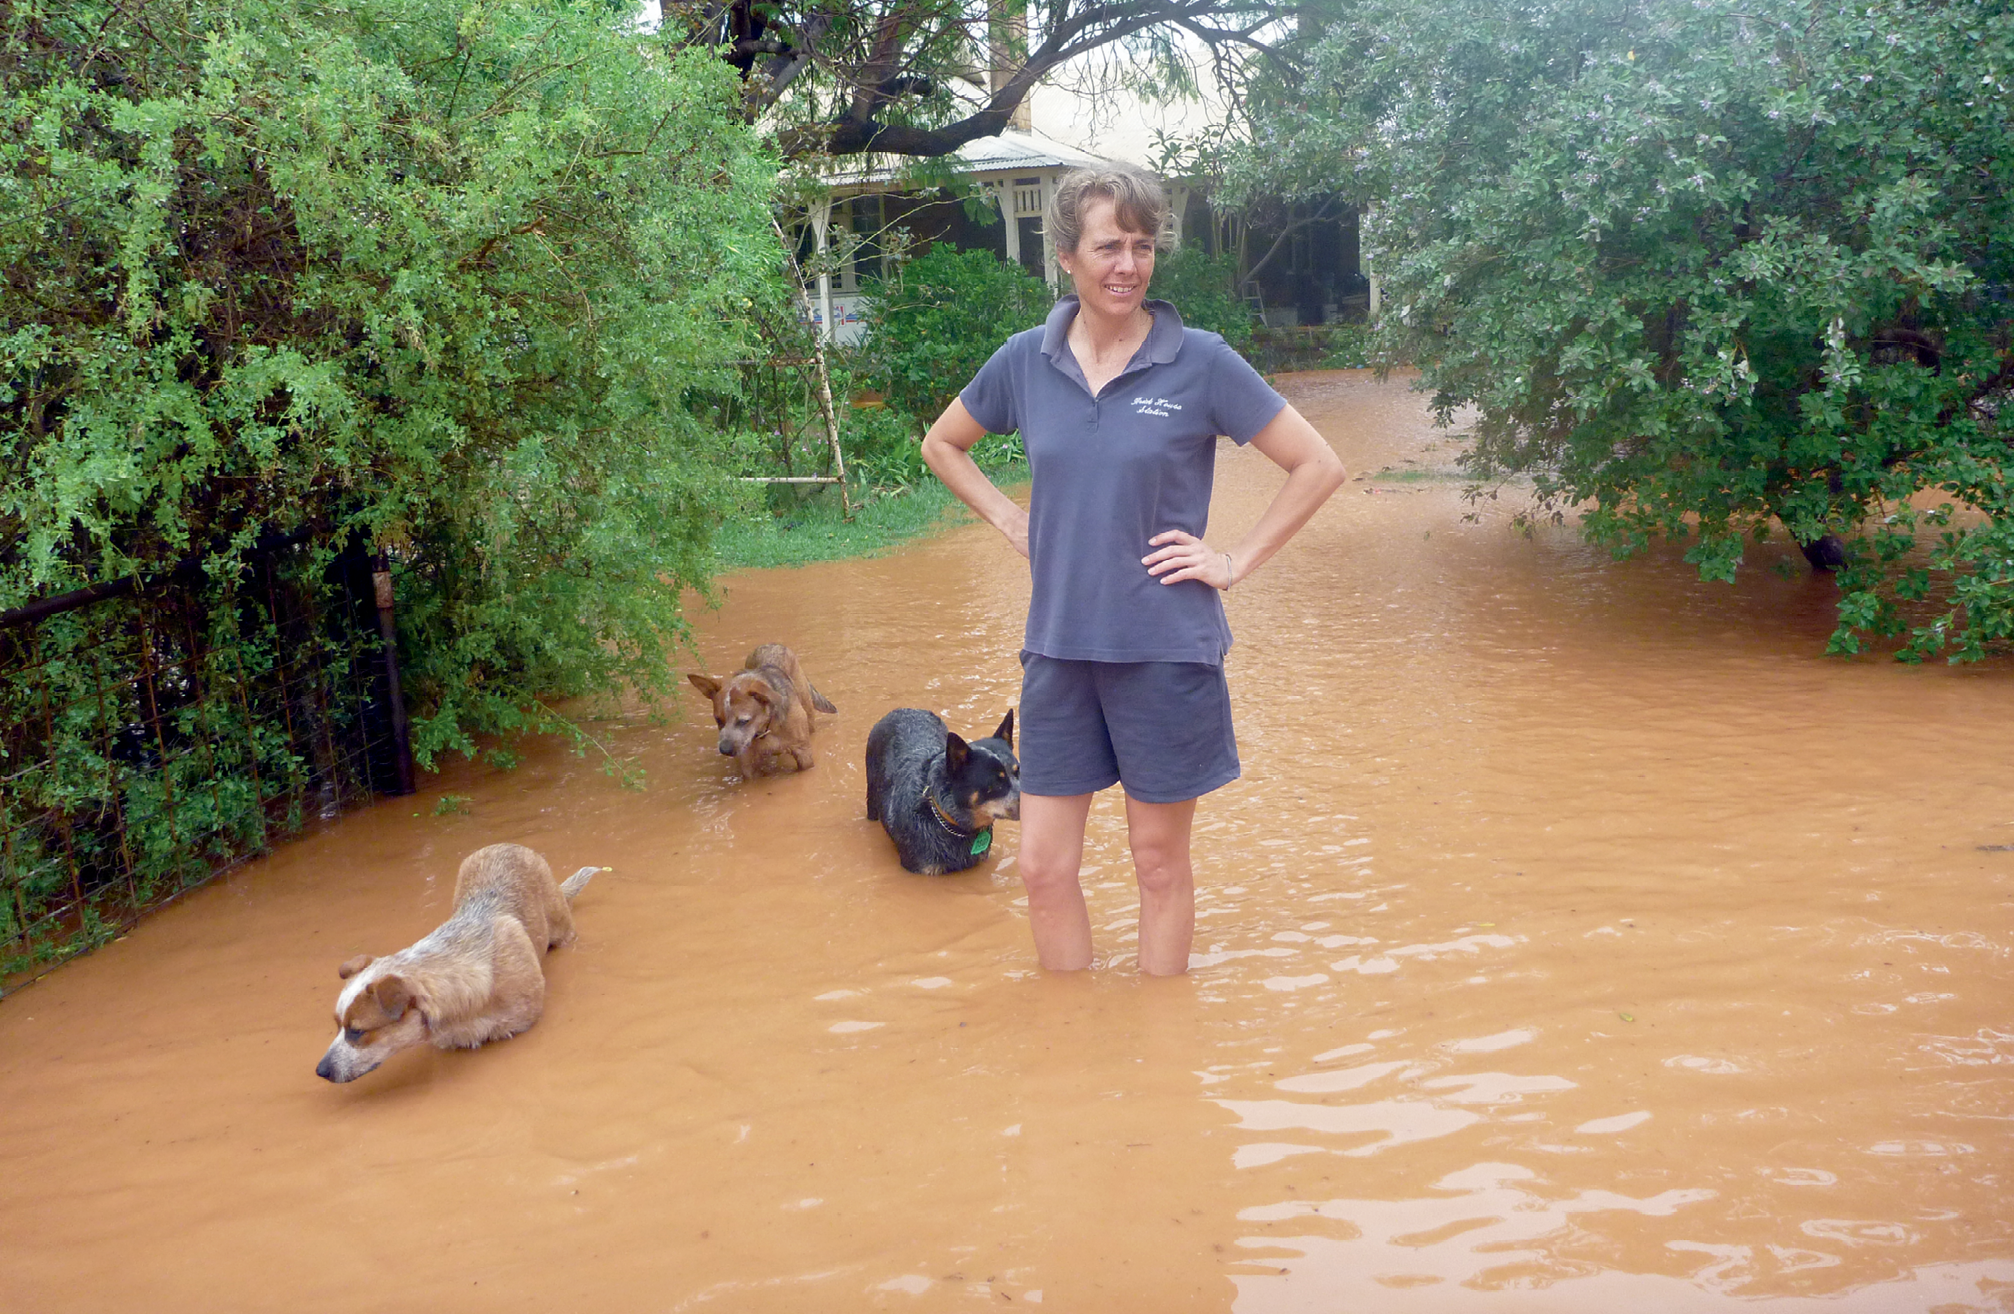 Photograph of Rebecca standing in nearly kneed-deep flood waters, along with three dogs.